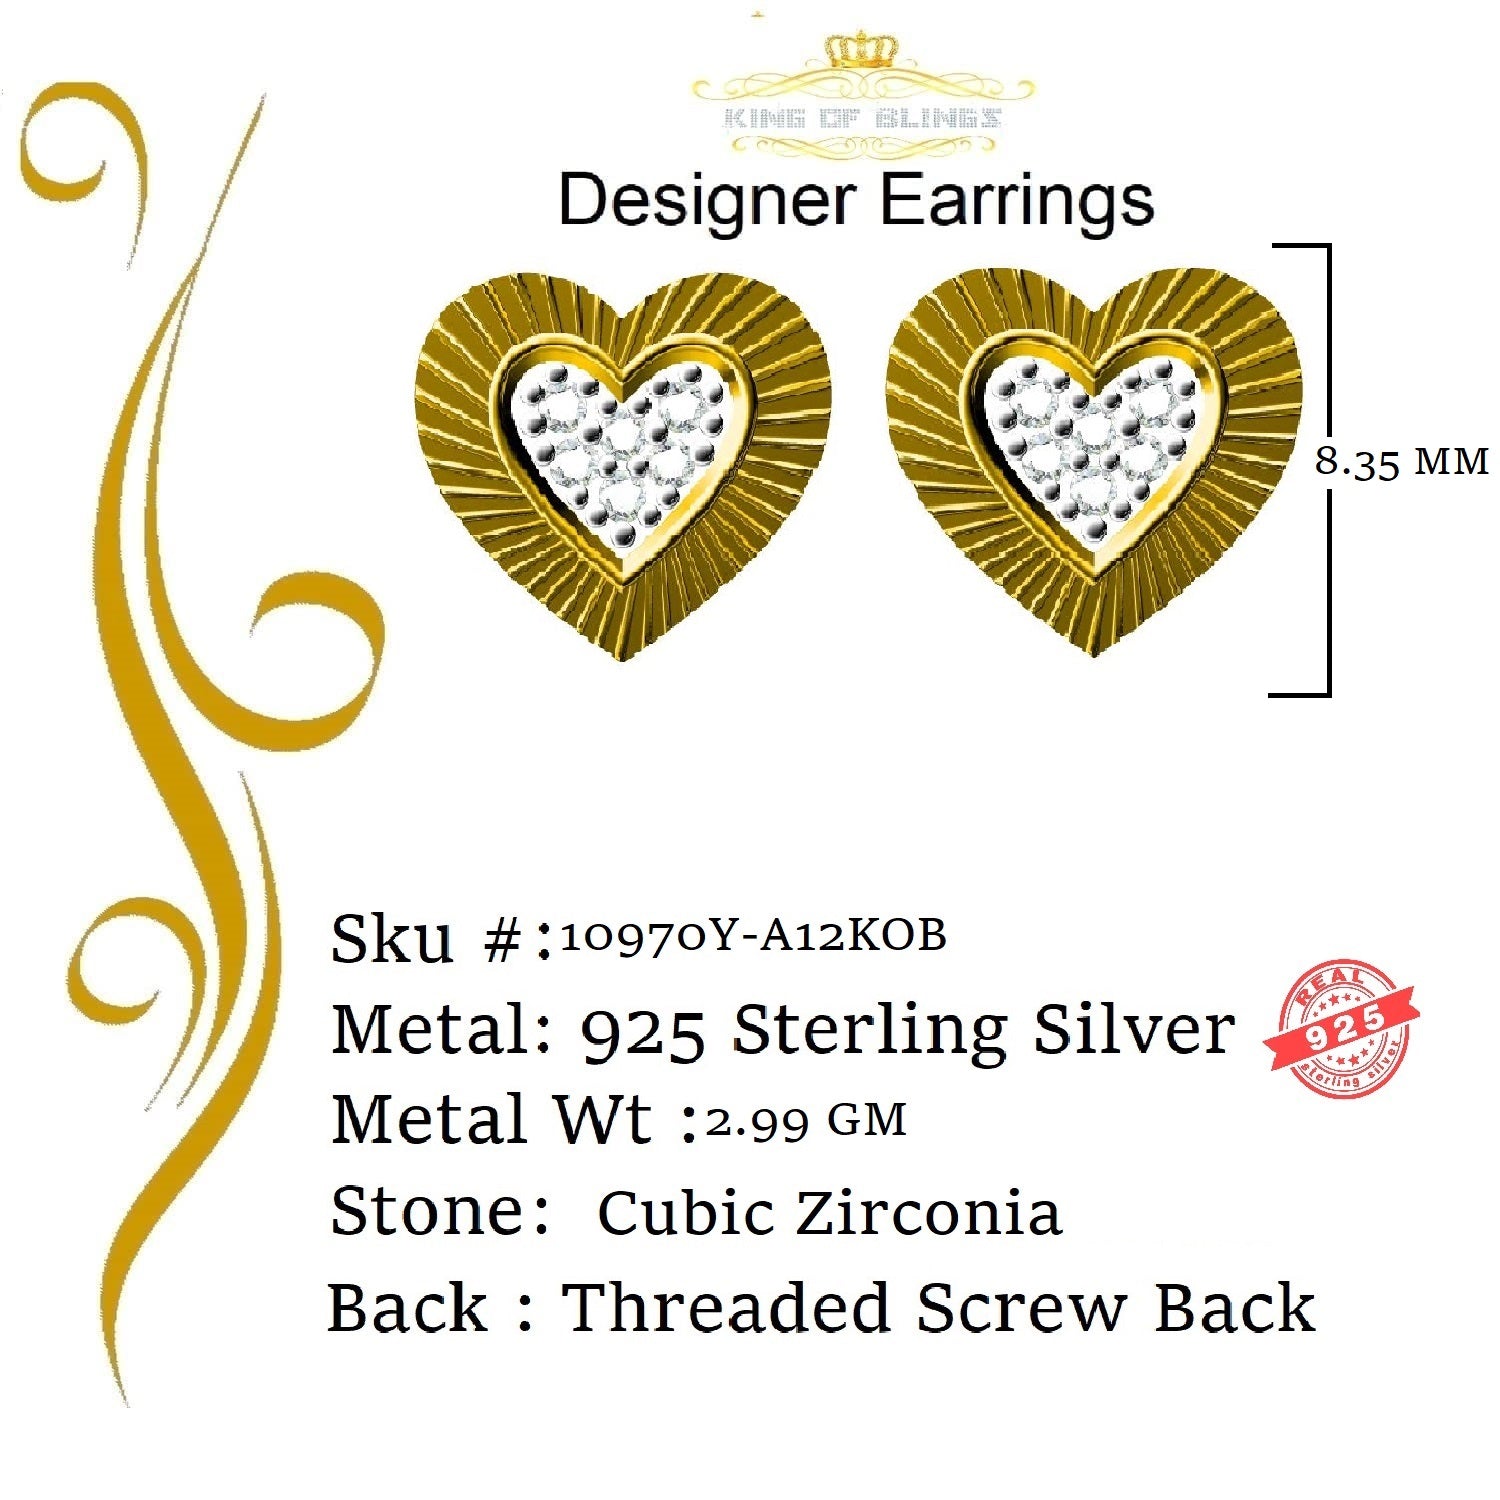 King of Bling's Aretes Para Hombre 925 Yellow Silver 0.24ct Cubic Zirconia Heart Women's Earring KING OF BLINGS